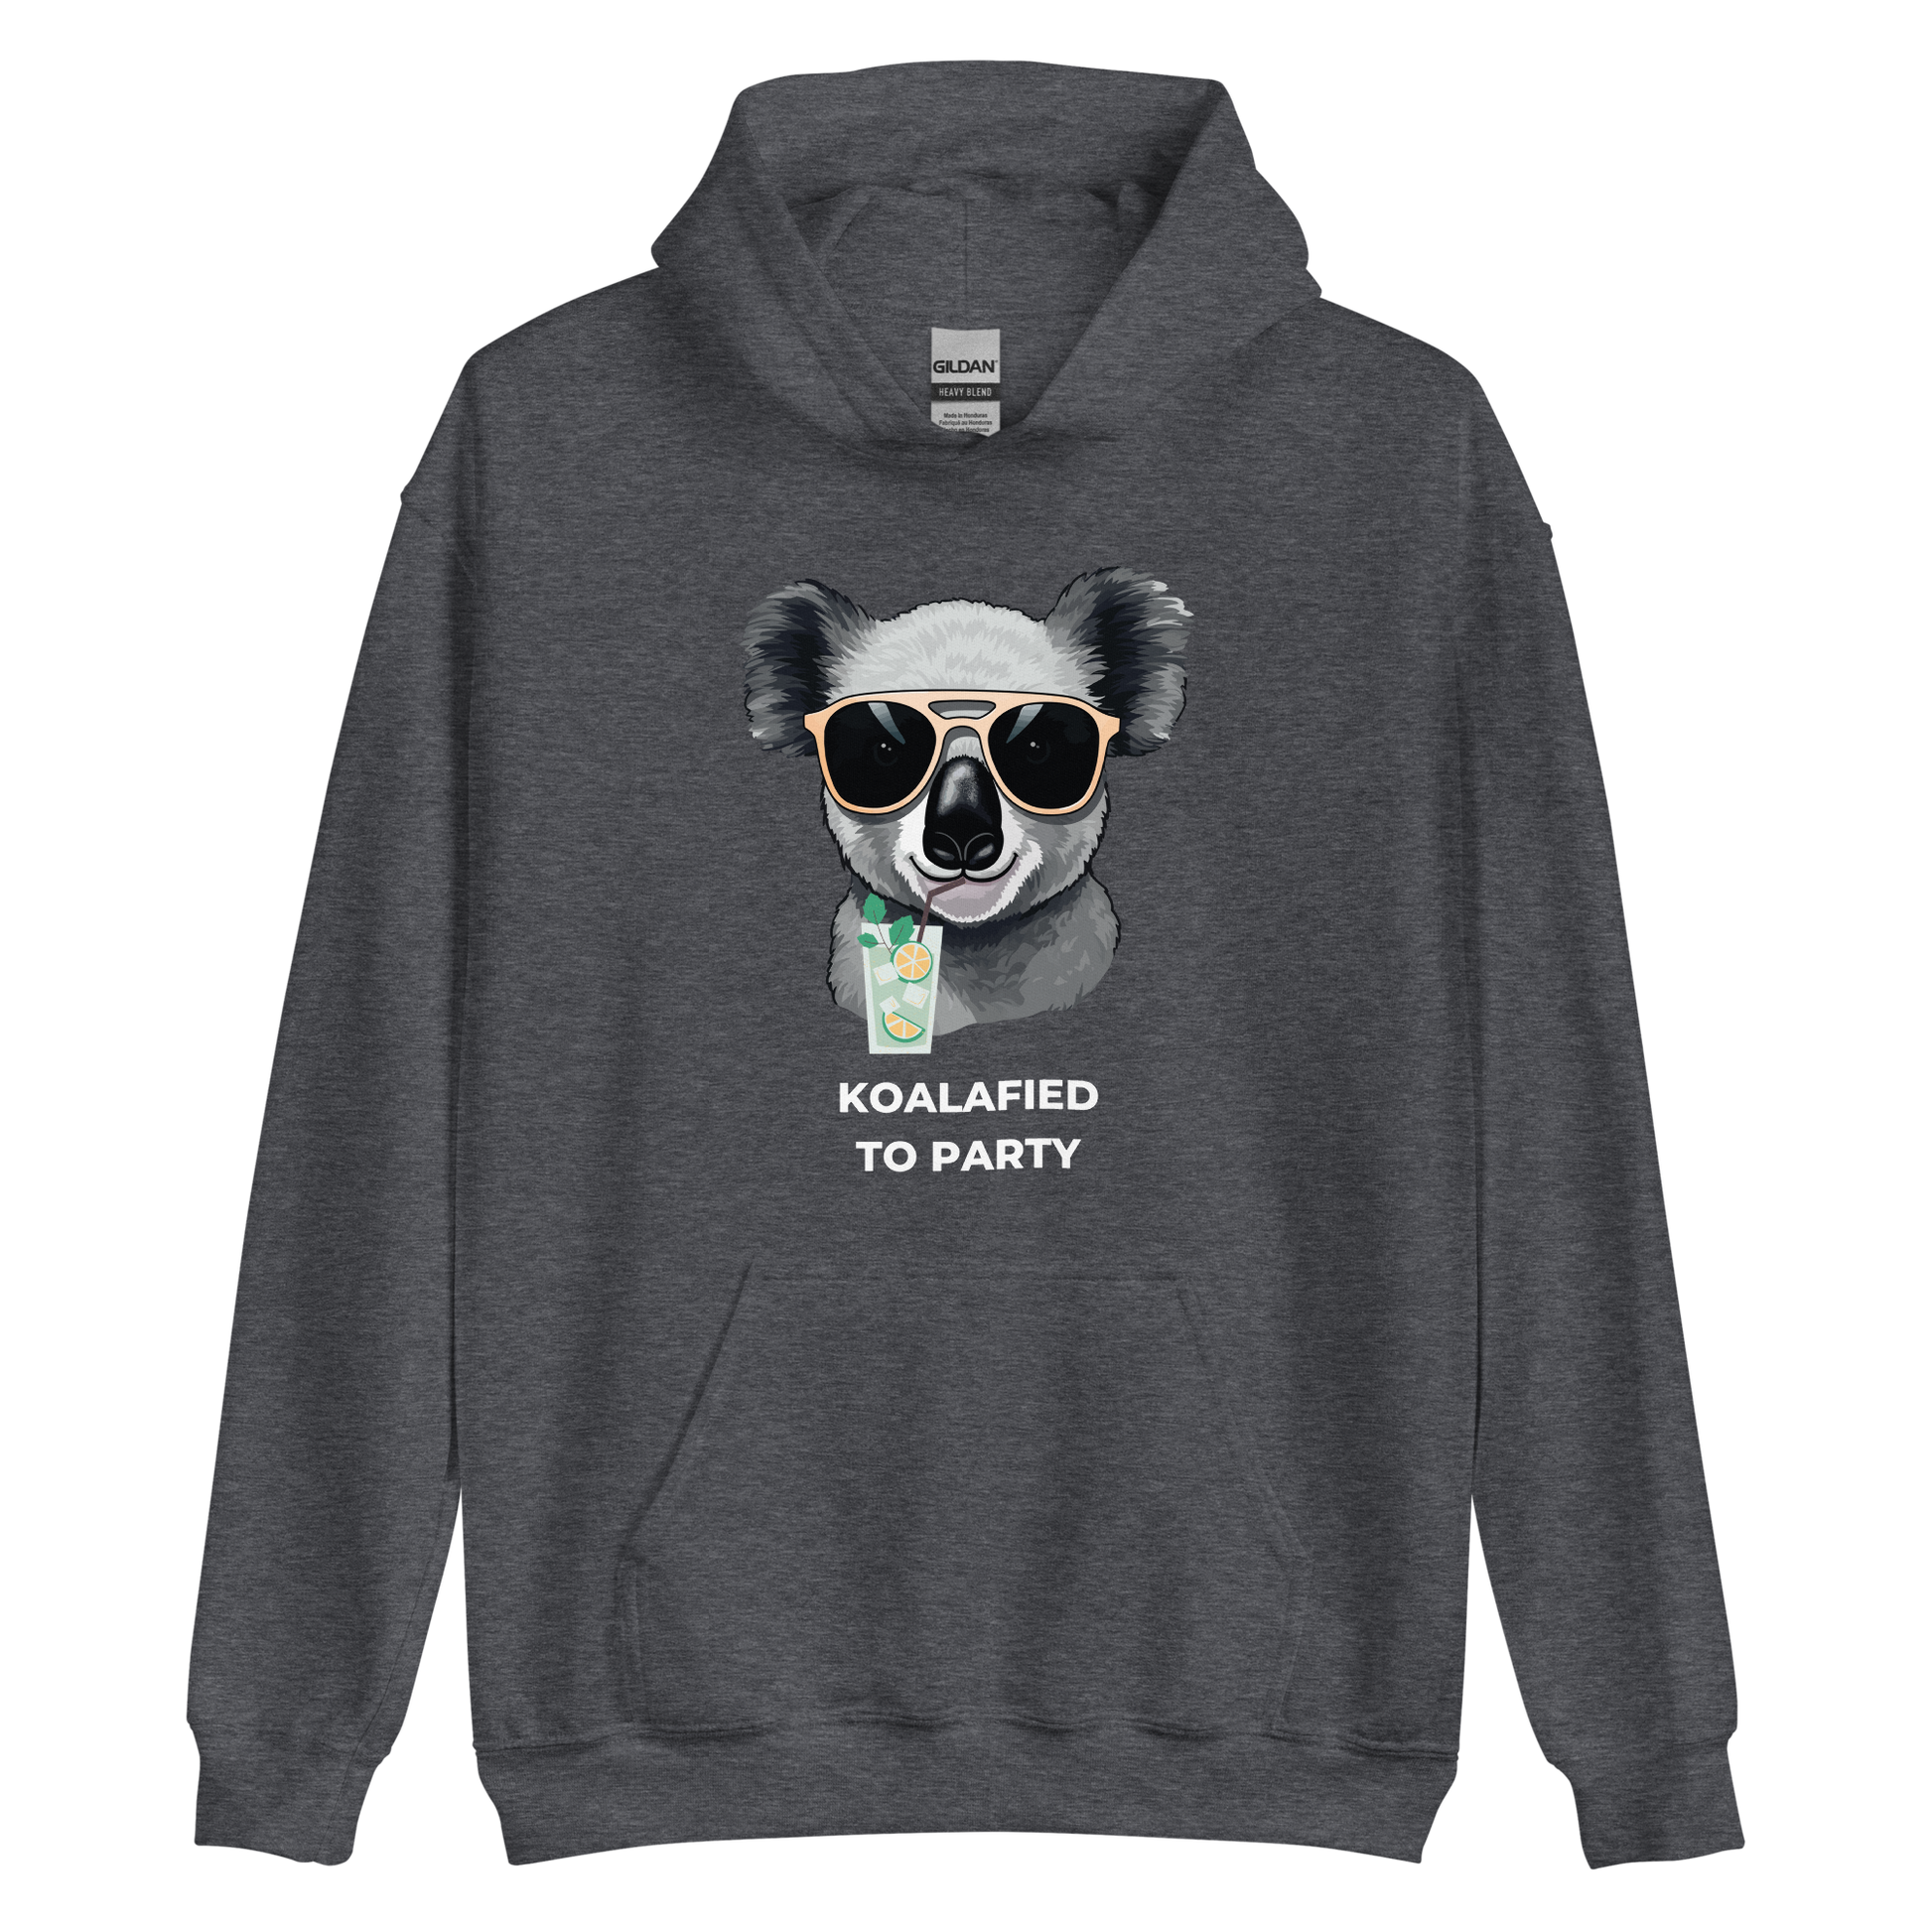 Dark Heather Koala Hoodie featuring a captivating Koalafied To Party graphic on the chest - Funny Graphic Koala Hoodies - Boozy Fox